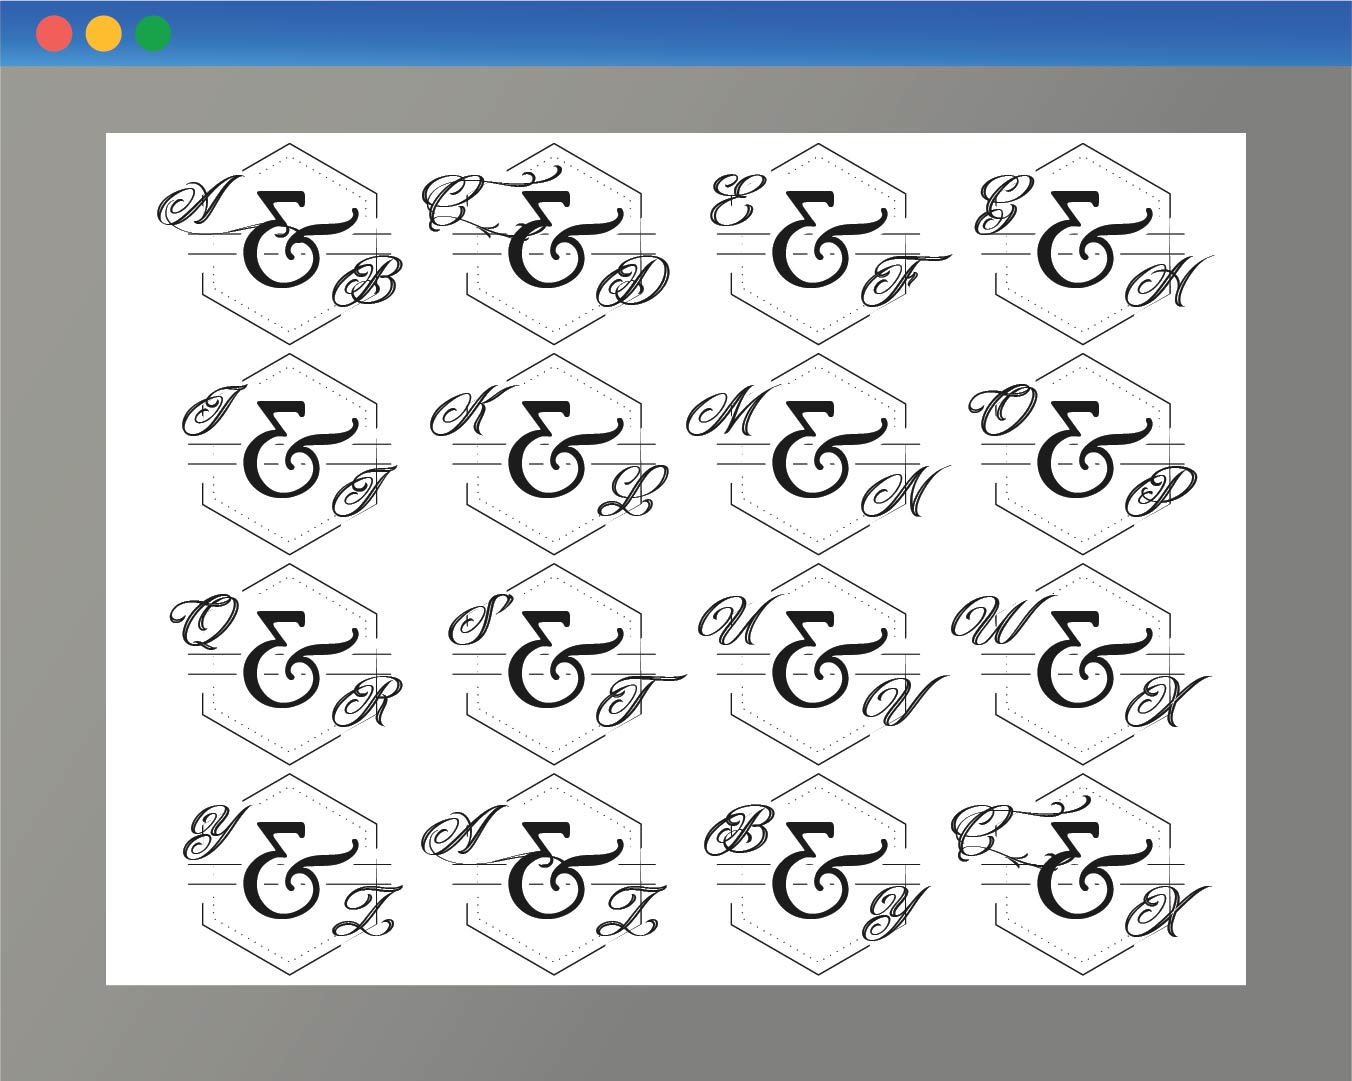 How-To-Make-A-Monogram-In-Microsoft-Word